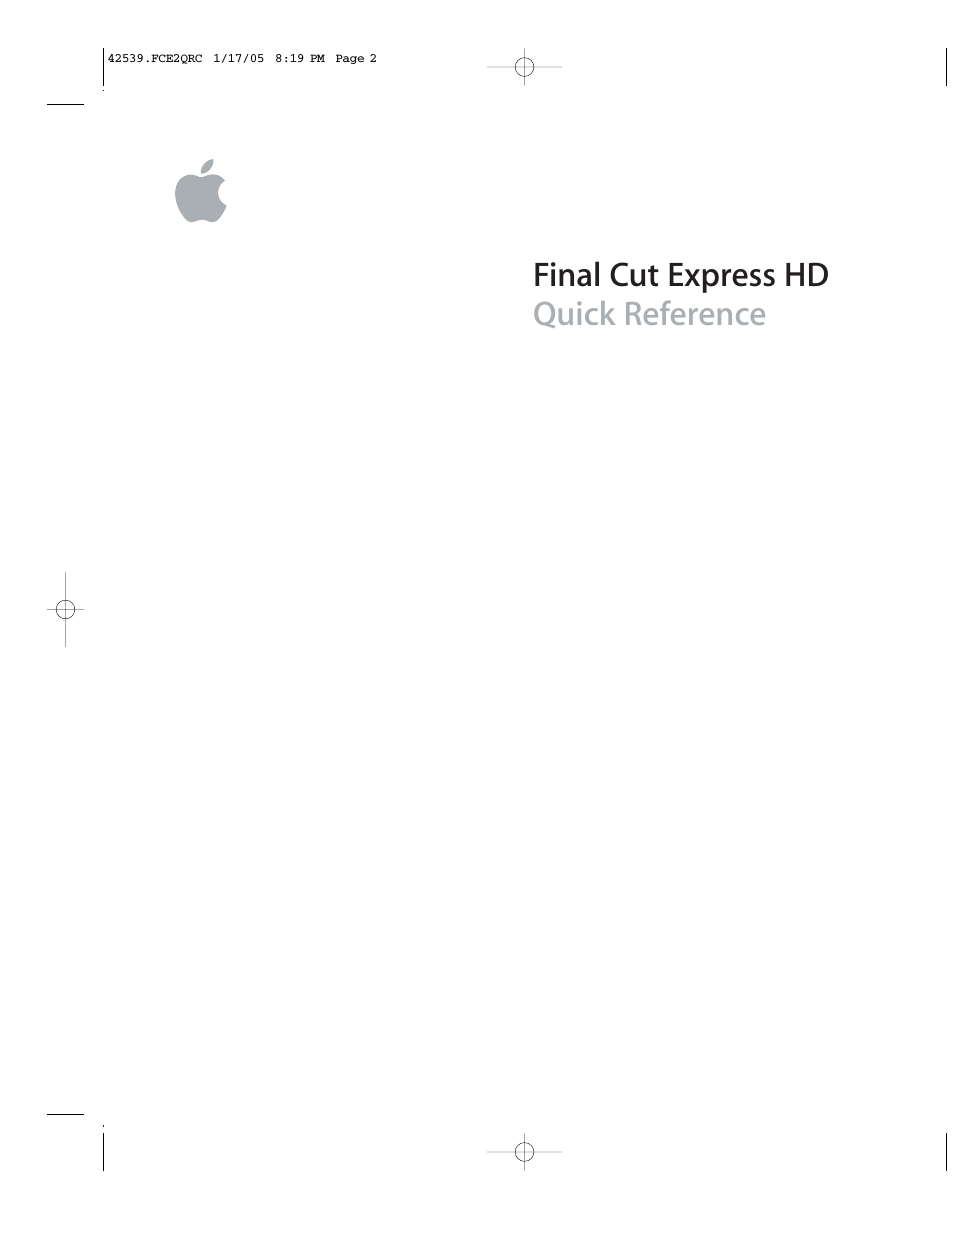 Final Cut Express HD Quick Reference